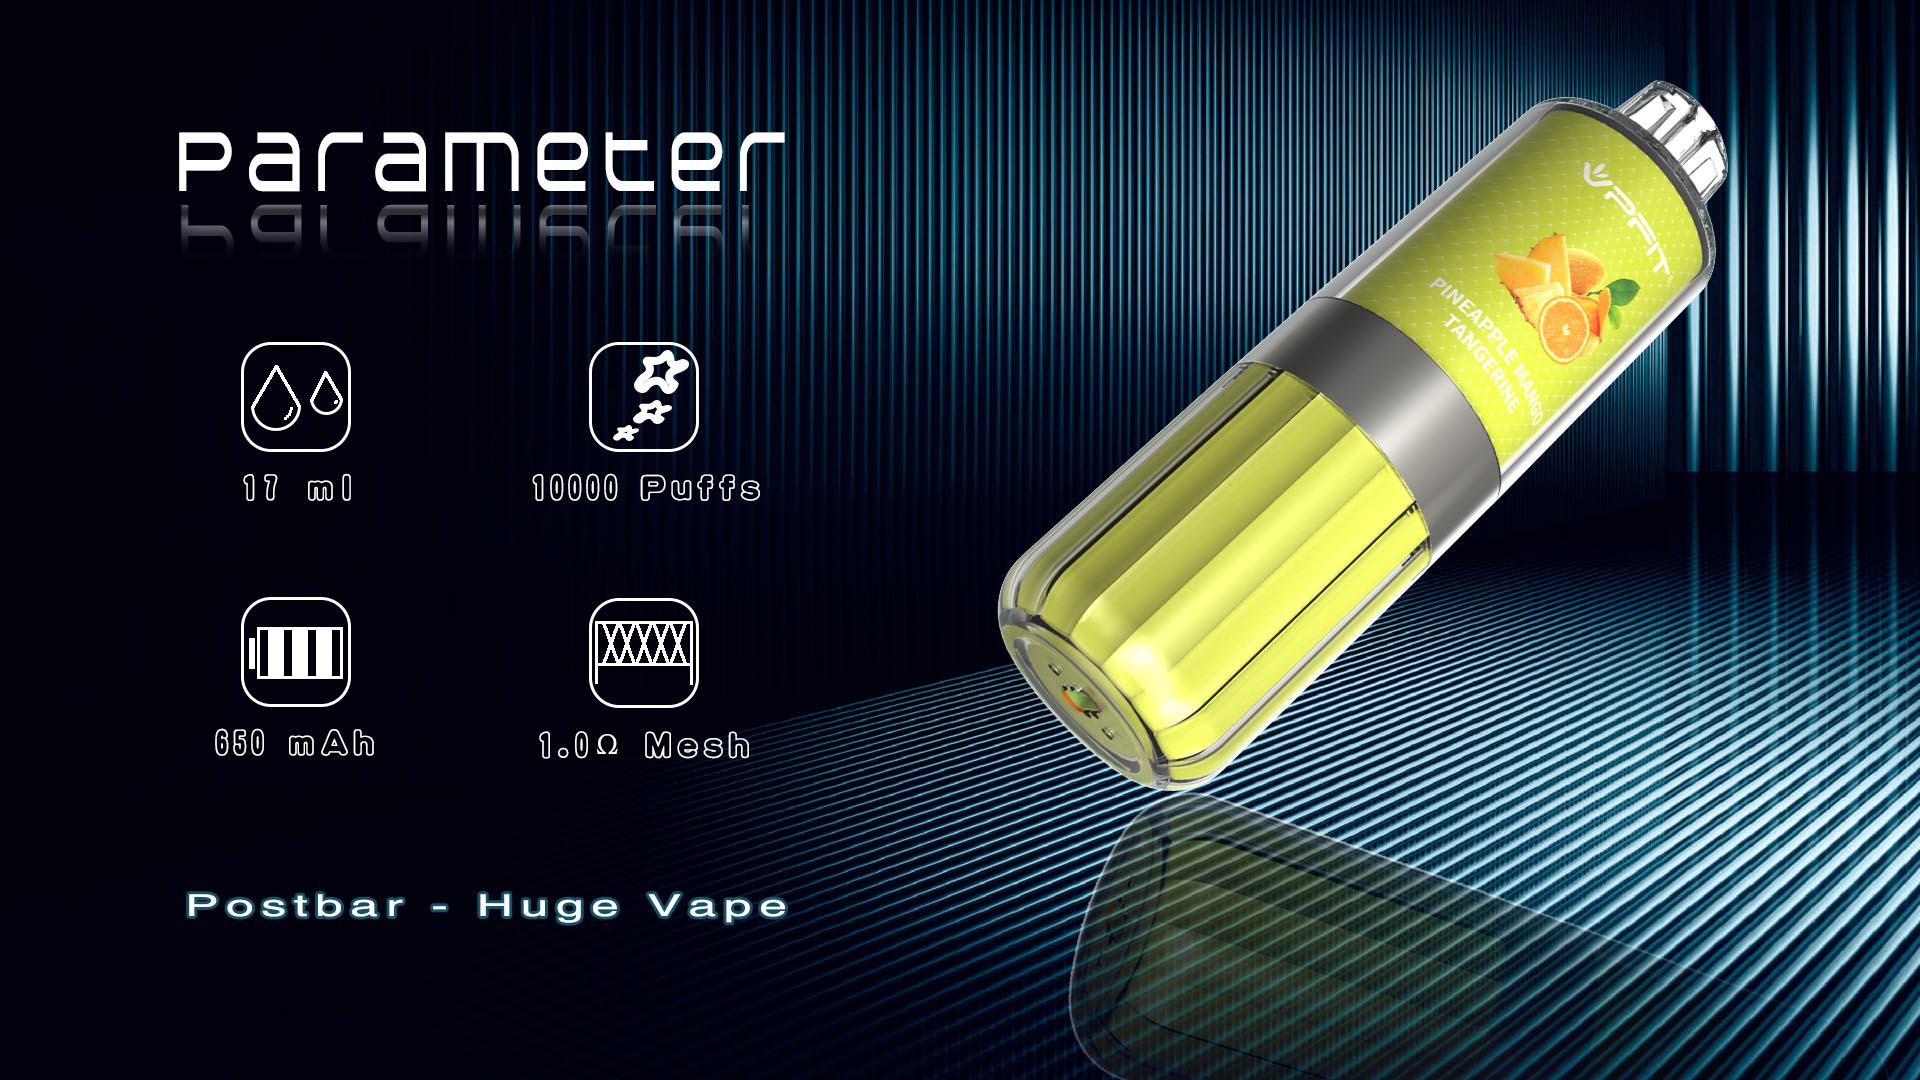 Parameters of this Disposable and rechargeable Vape Pen 10000 puffs